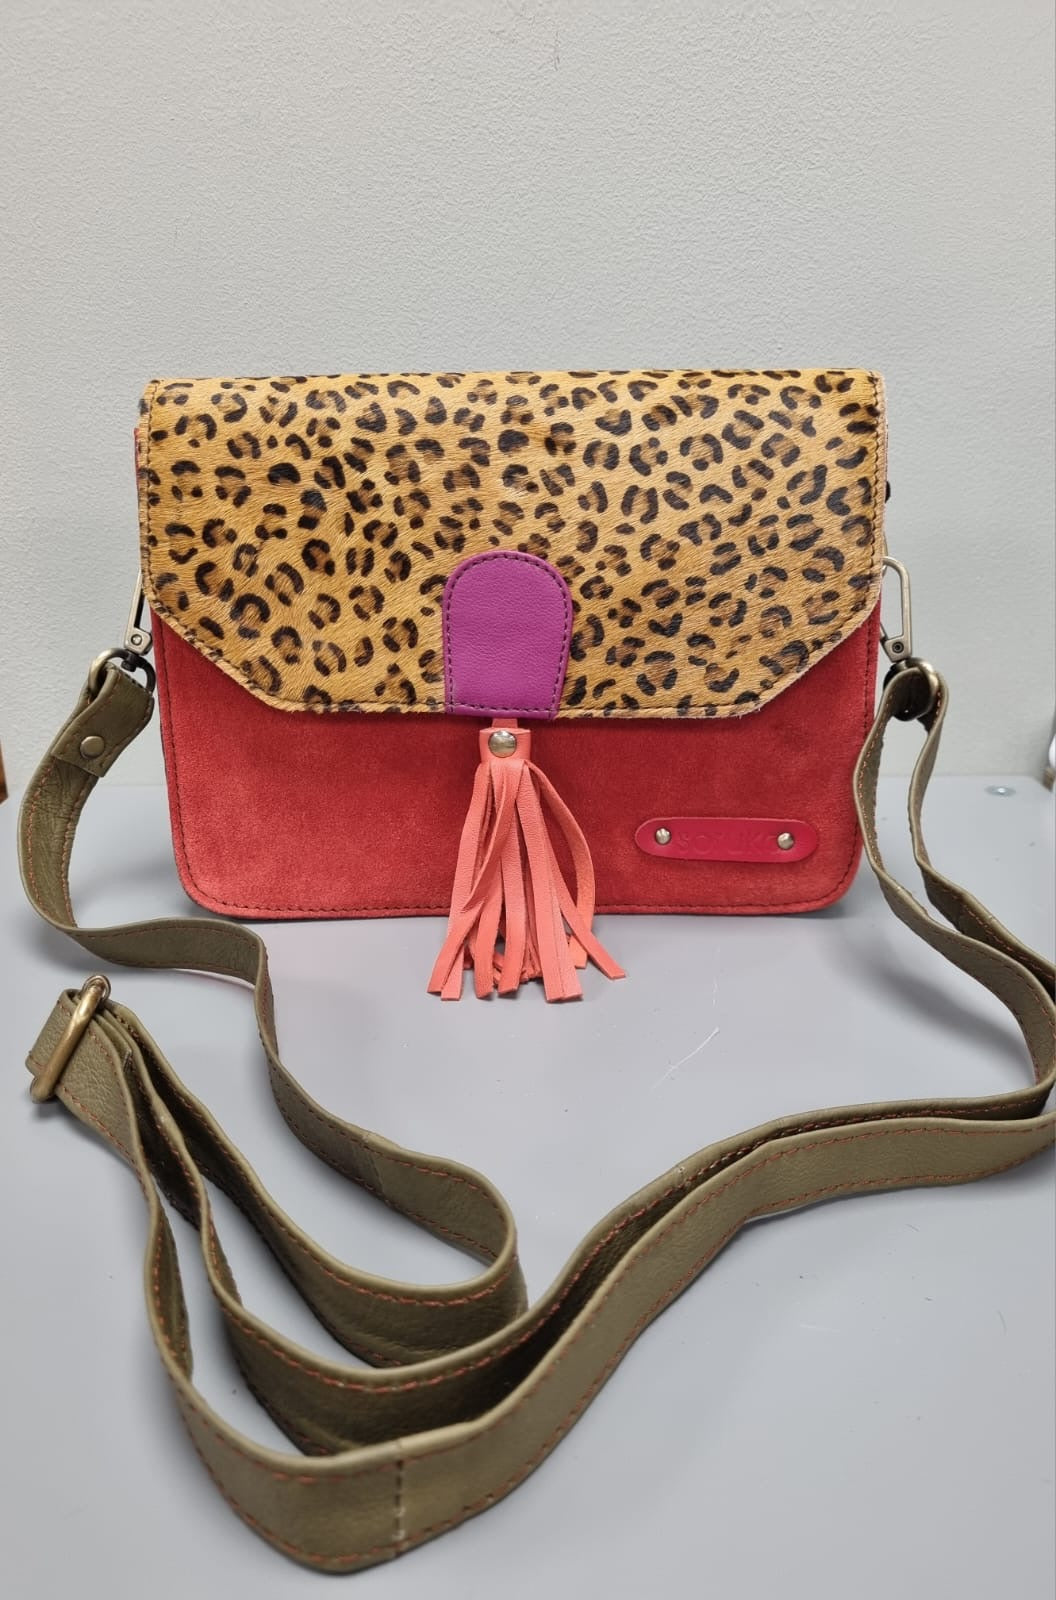 Claire Leather Cross Body Bag - Red Suede and Animal Print